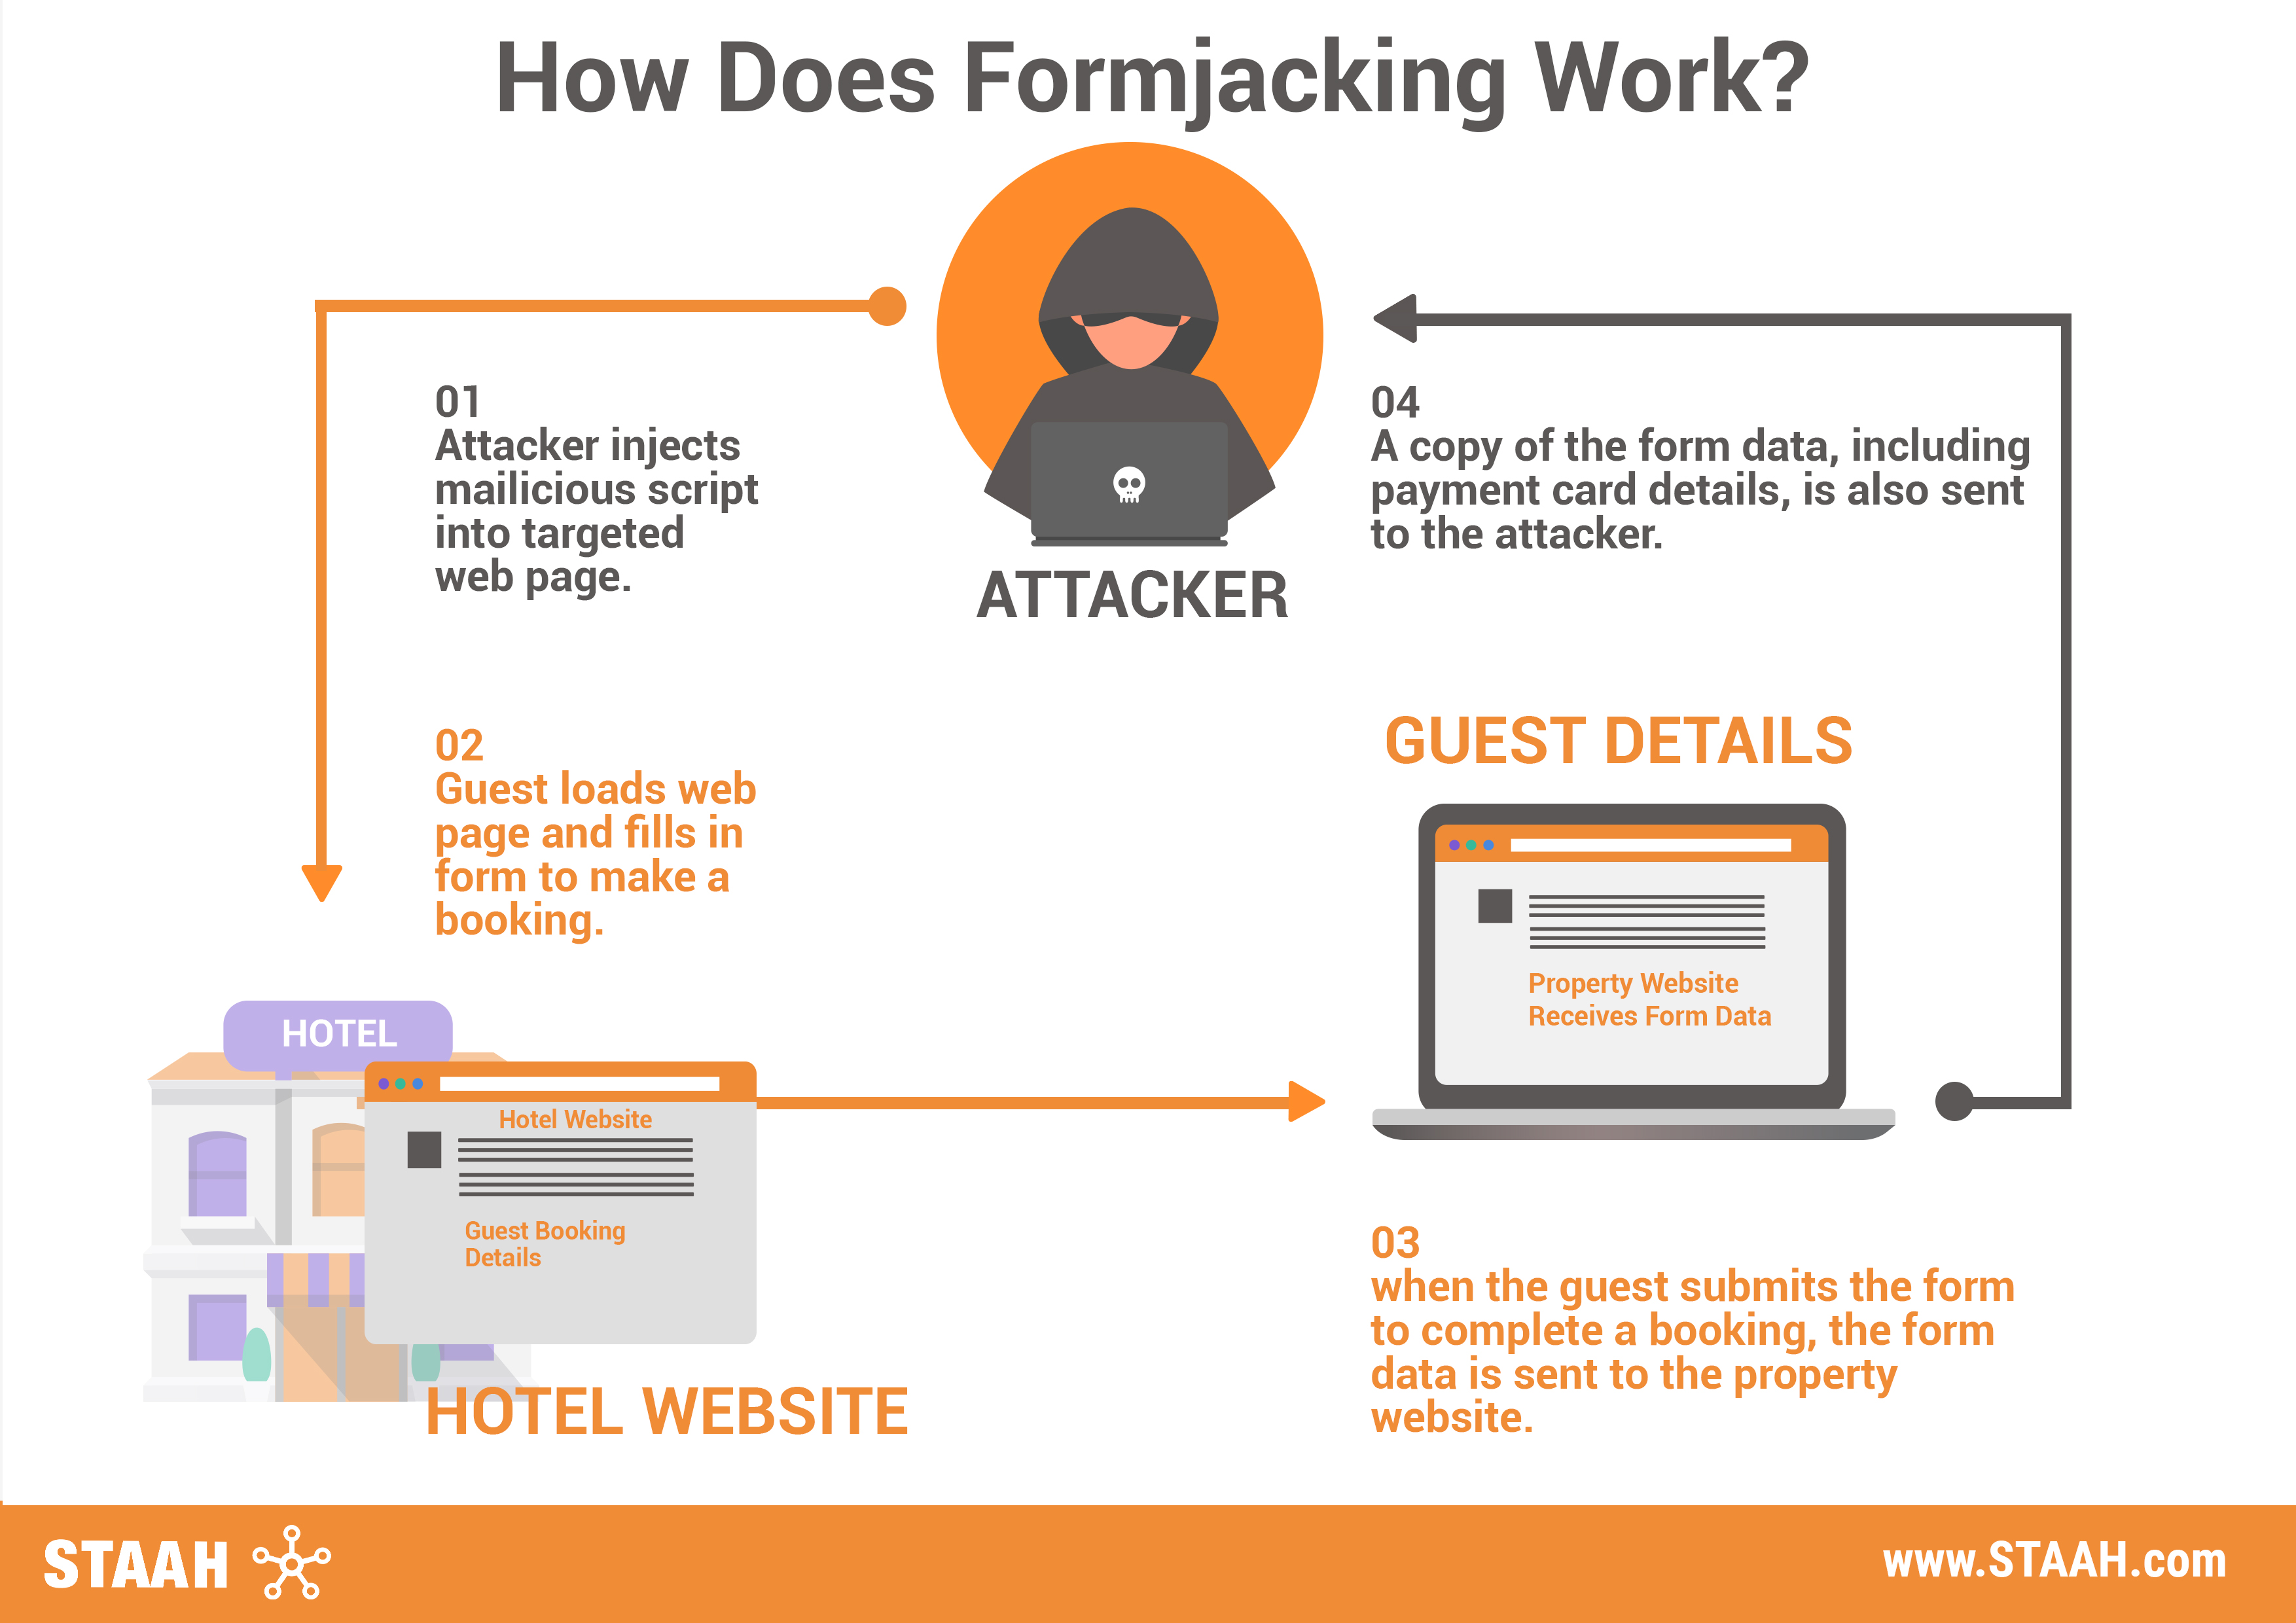 Why you should avoid using iframe formjacking